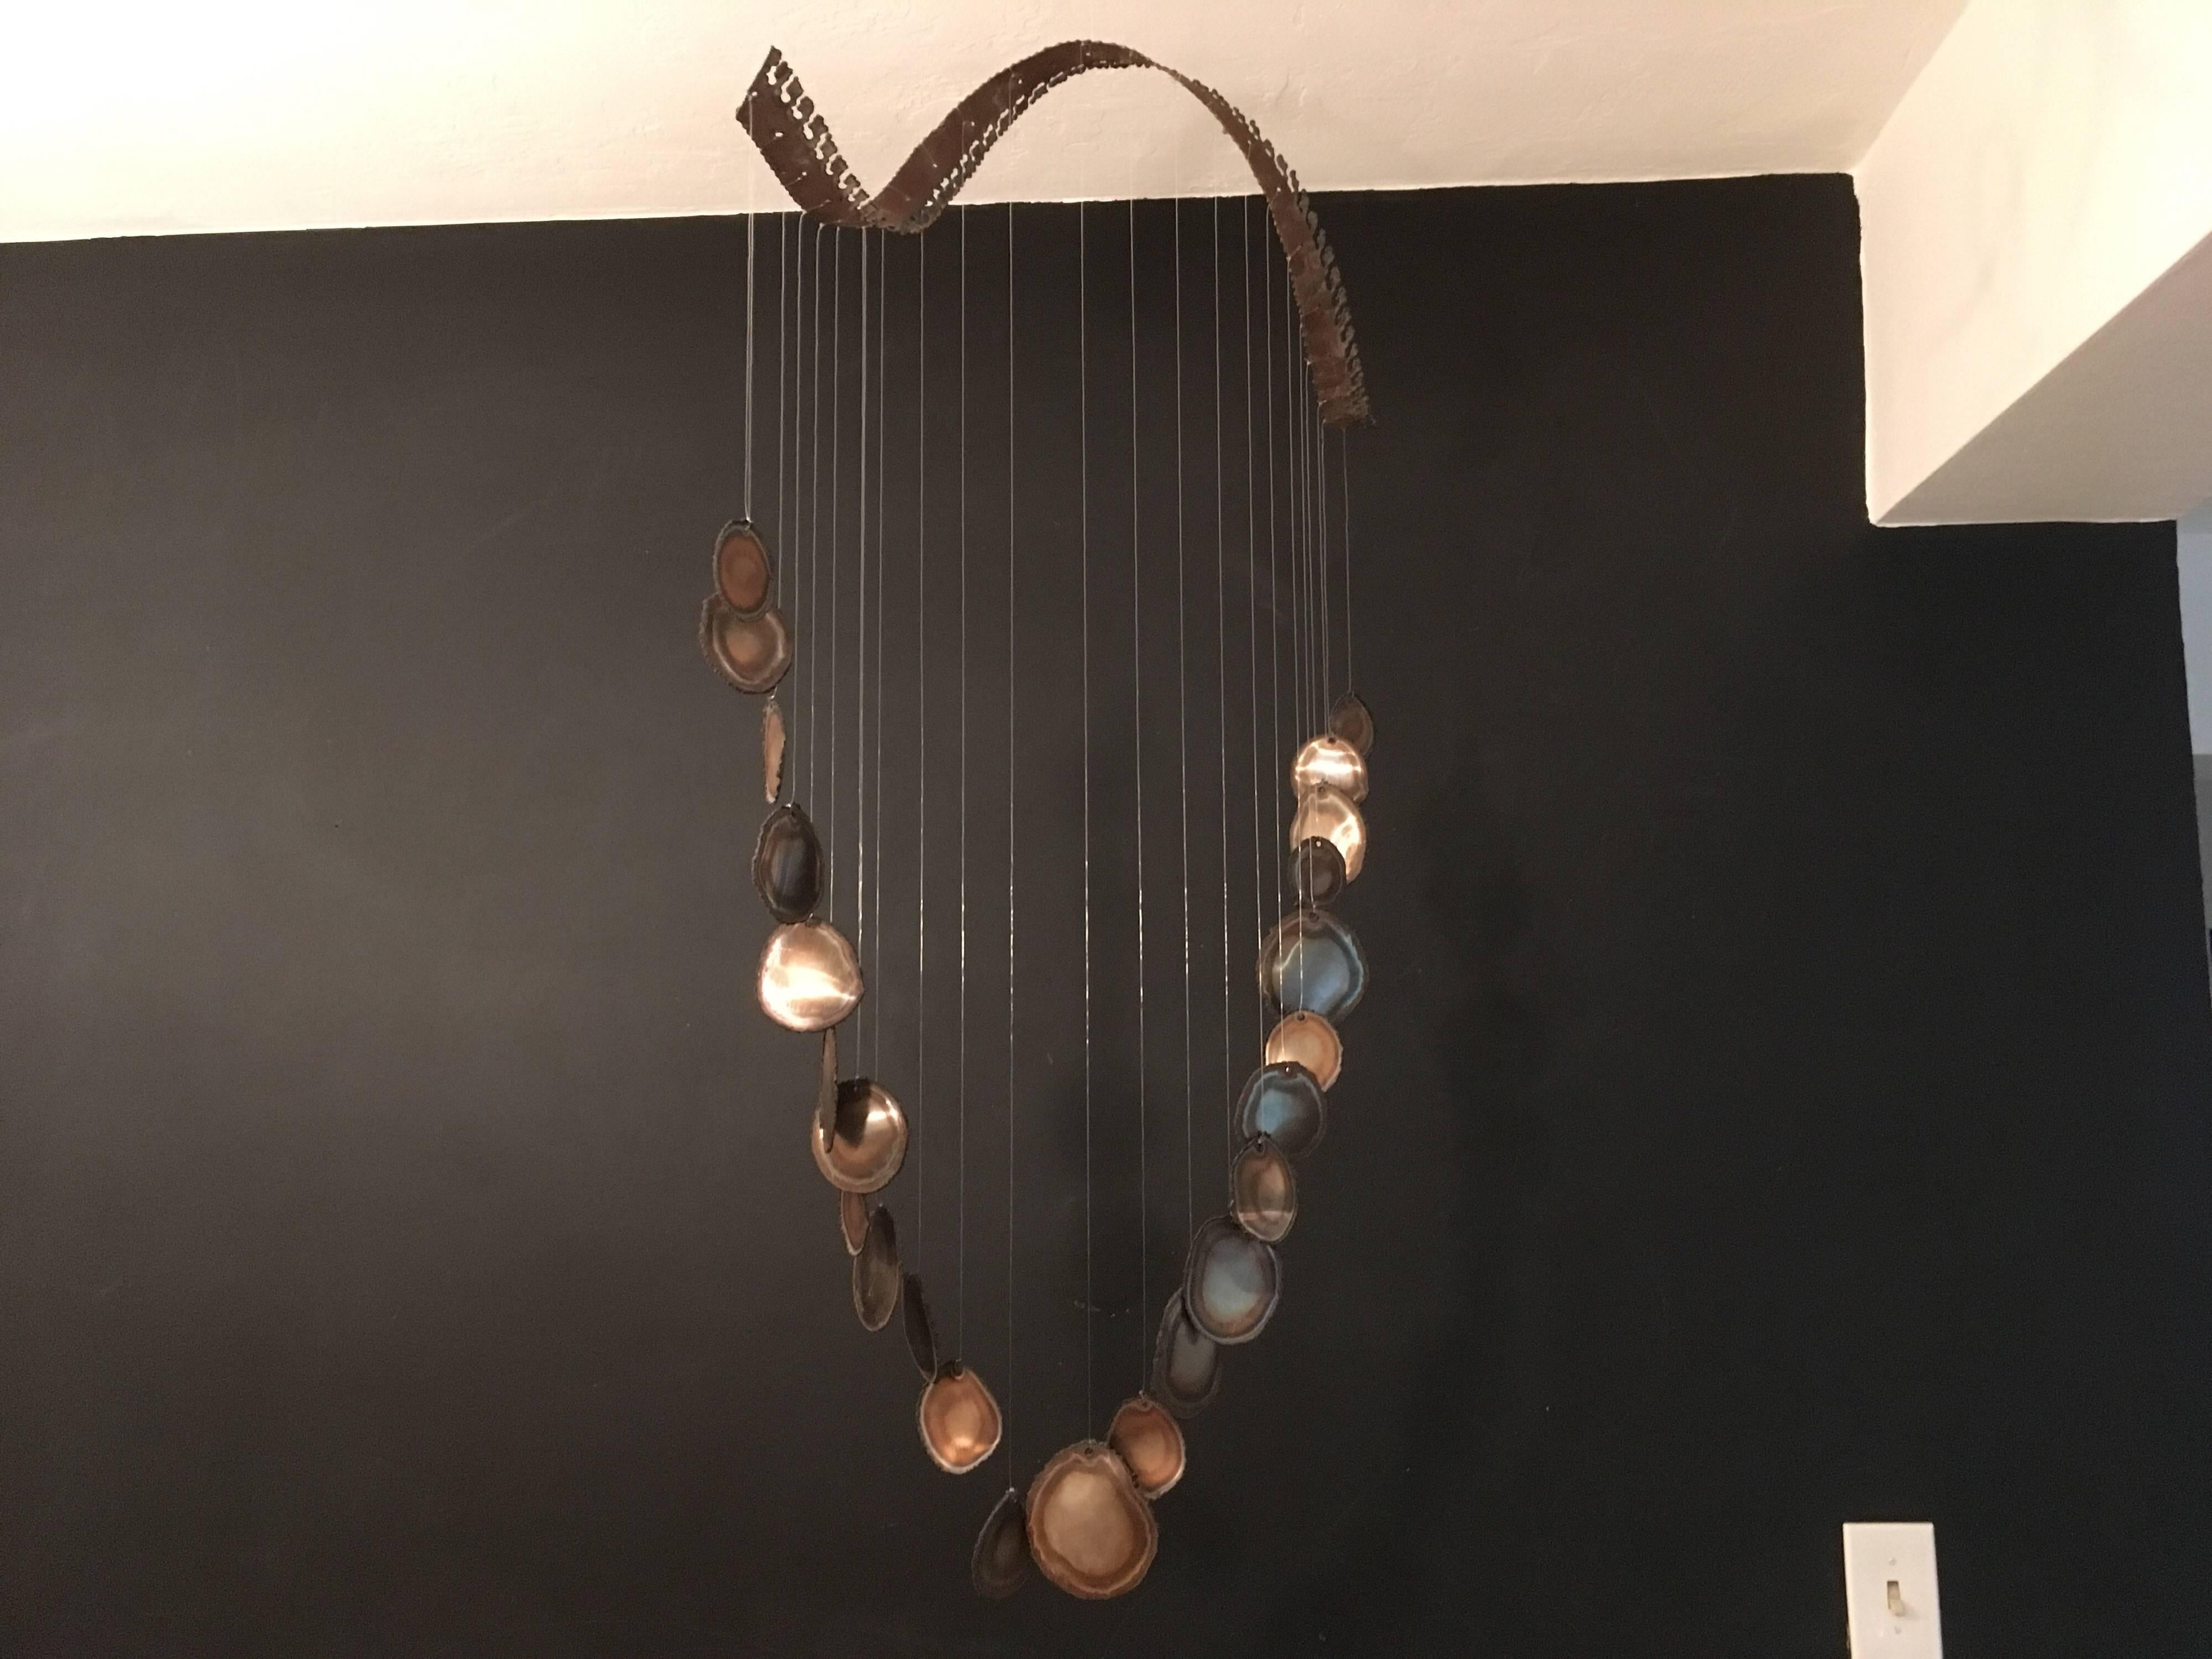 Late 20th Century Mid-Century Modern Hanging Sculpture Mobile Wind Chime For Sale